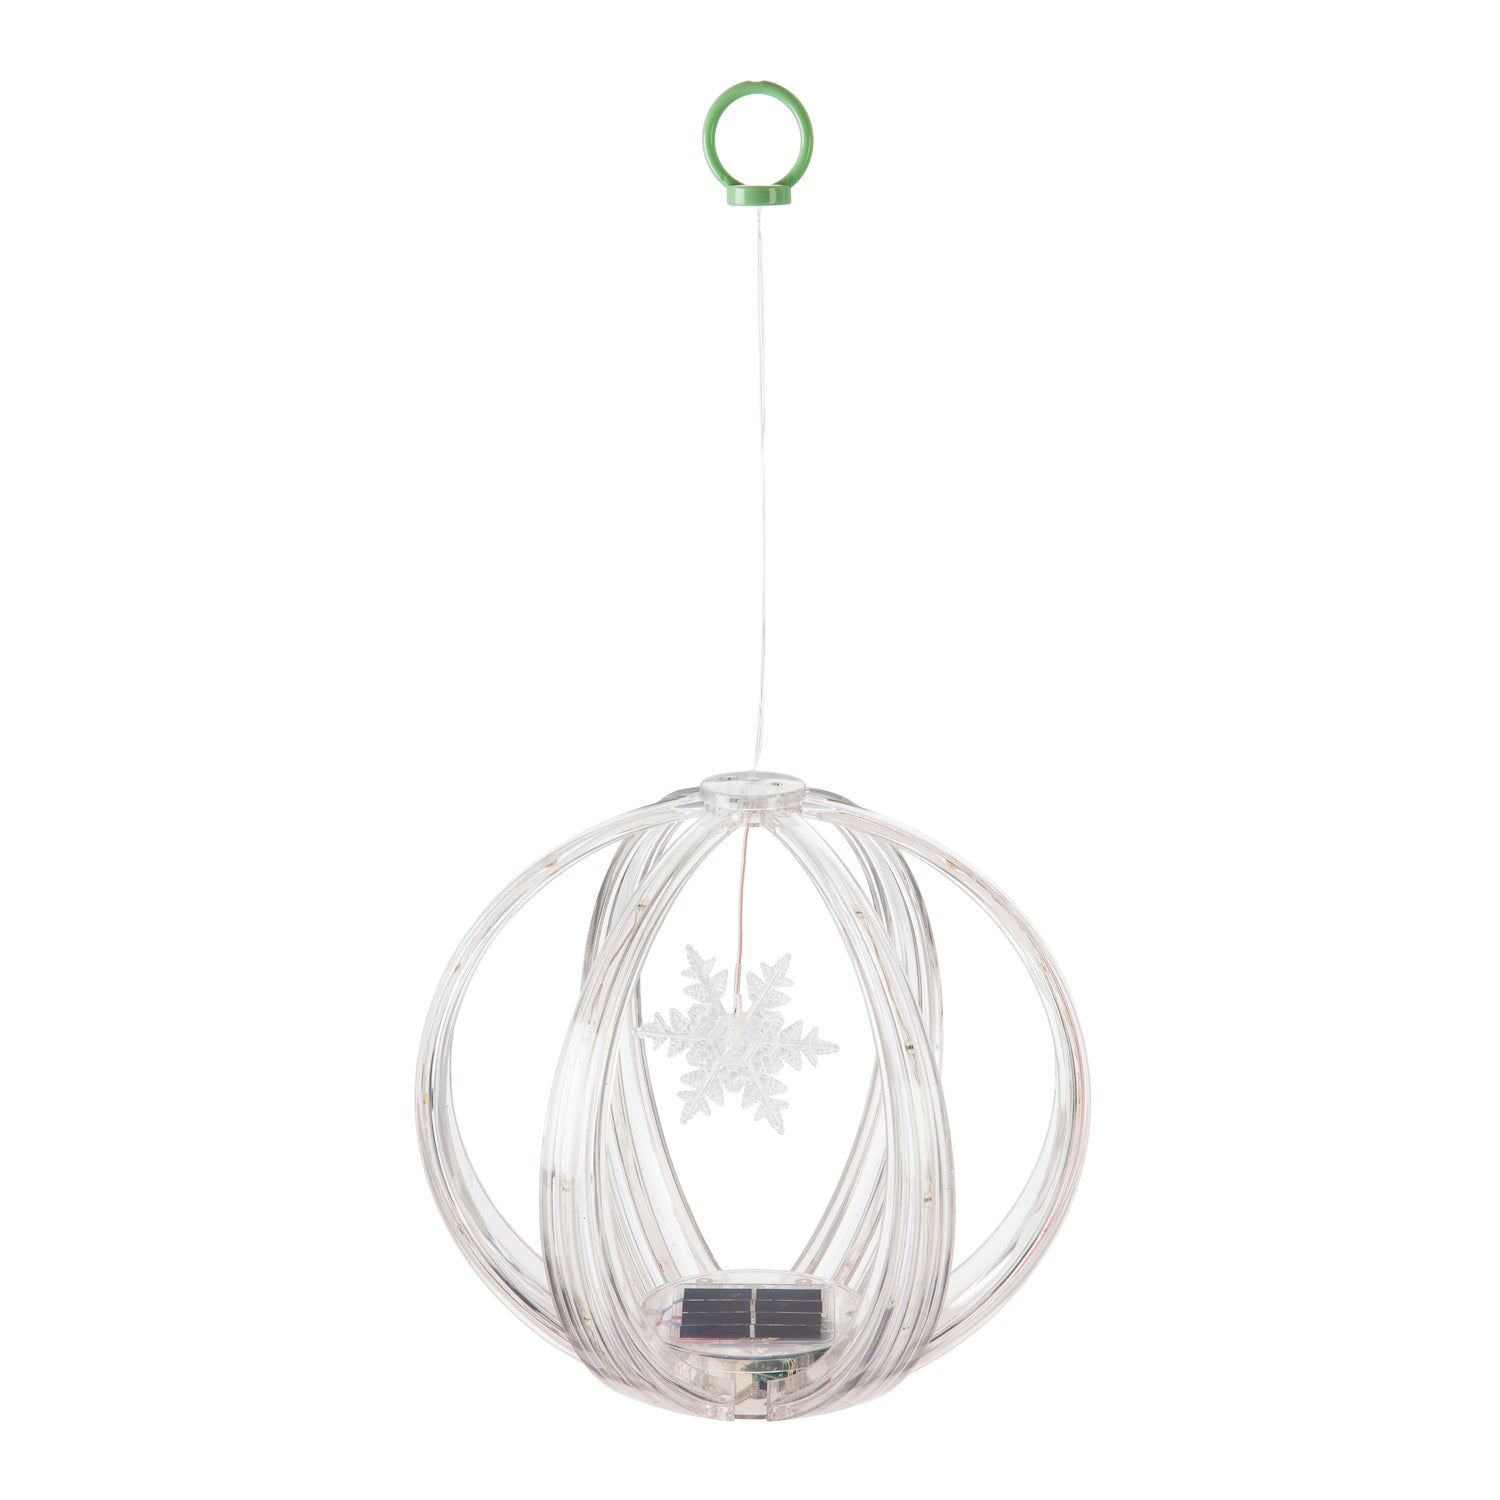 Snowflake Solar Mobile Sphere with Multicolor Chasing Light Display